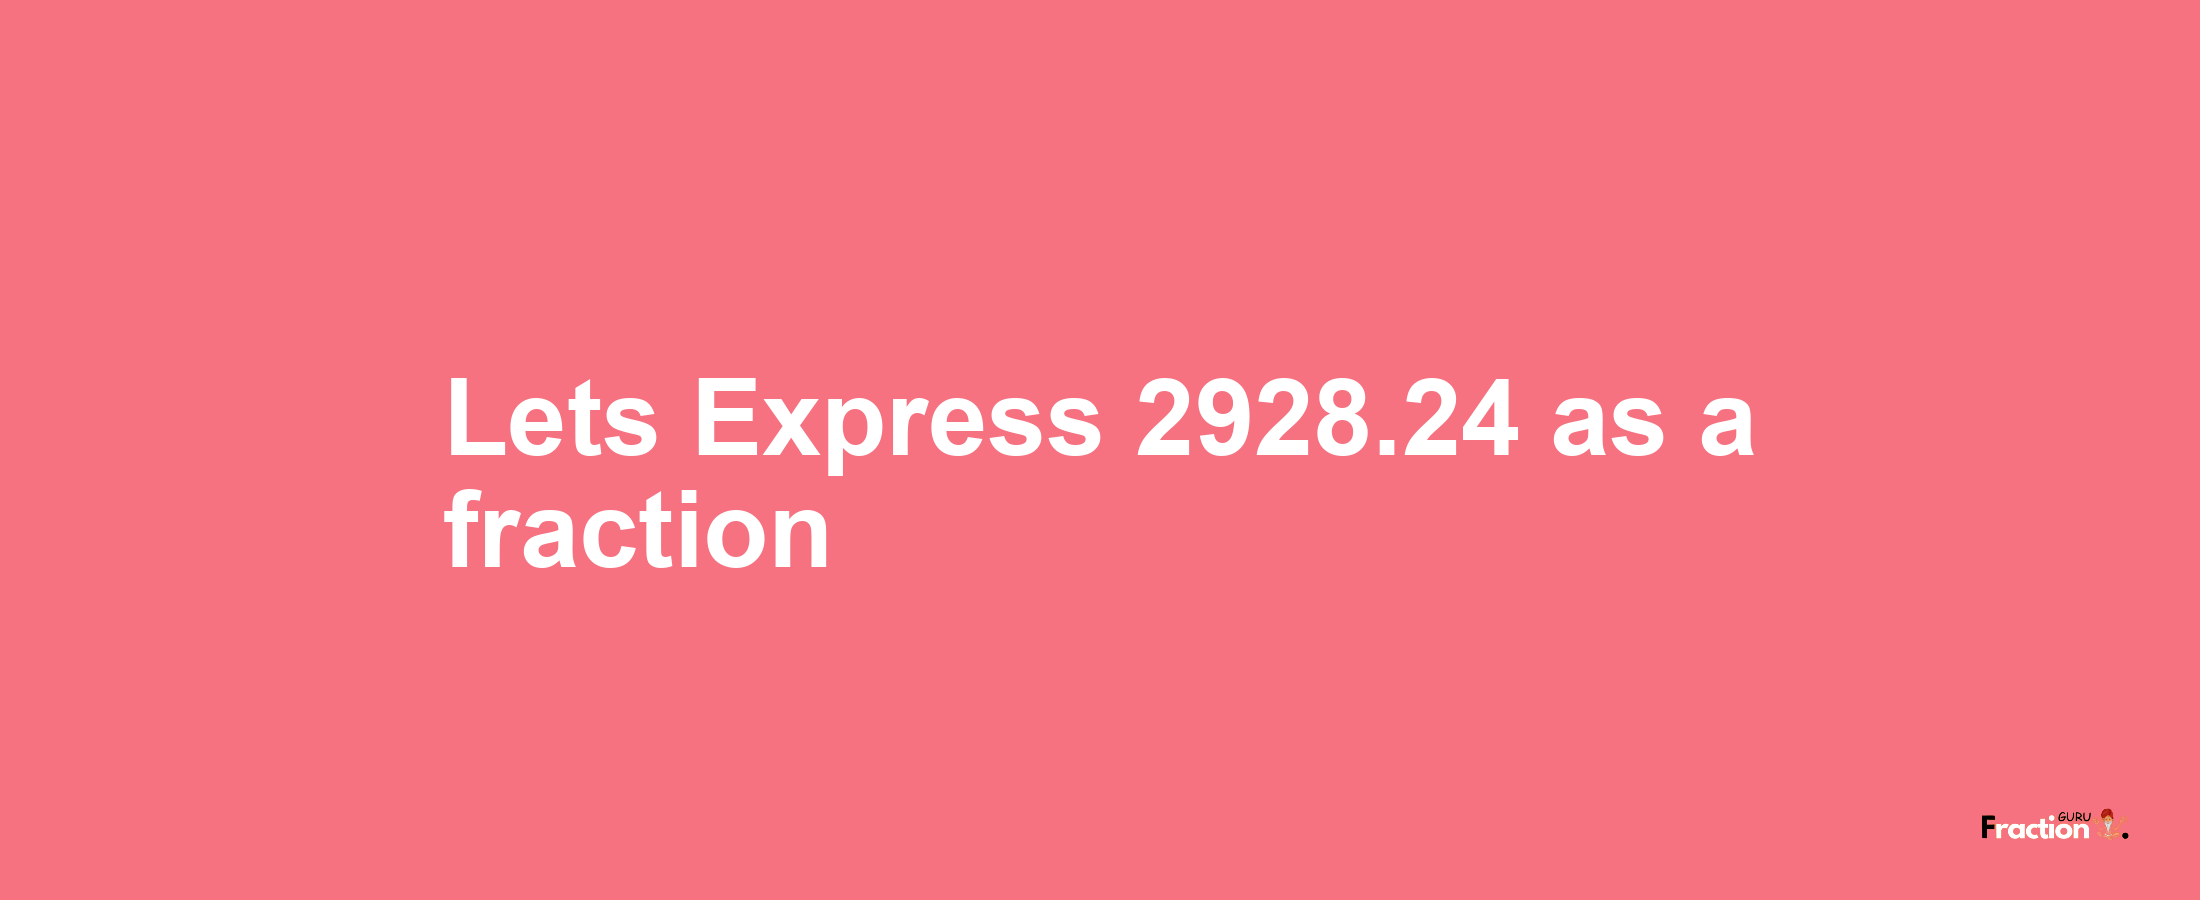 Lets Express 2928.24 as afraction